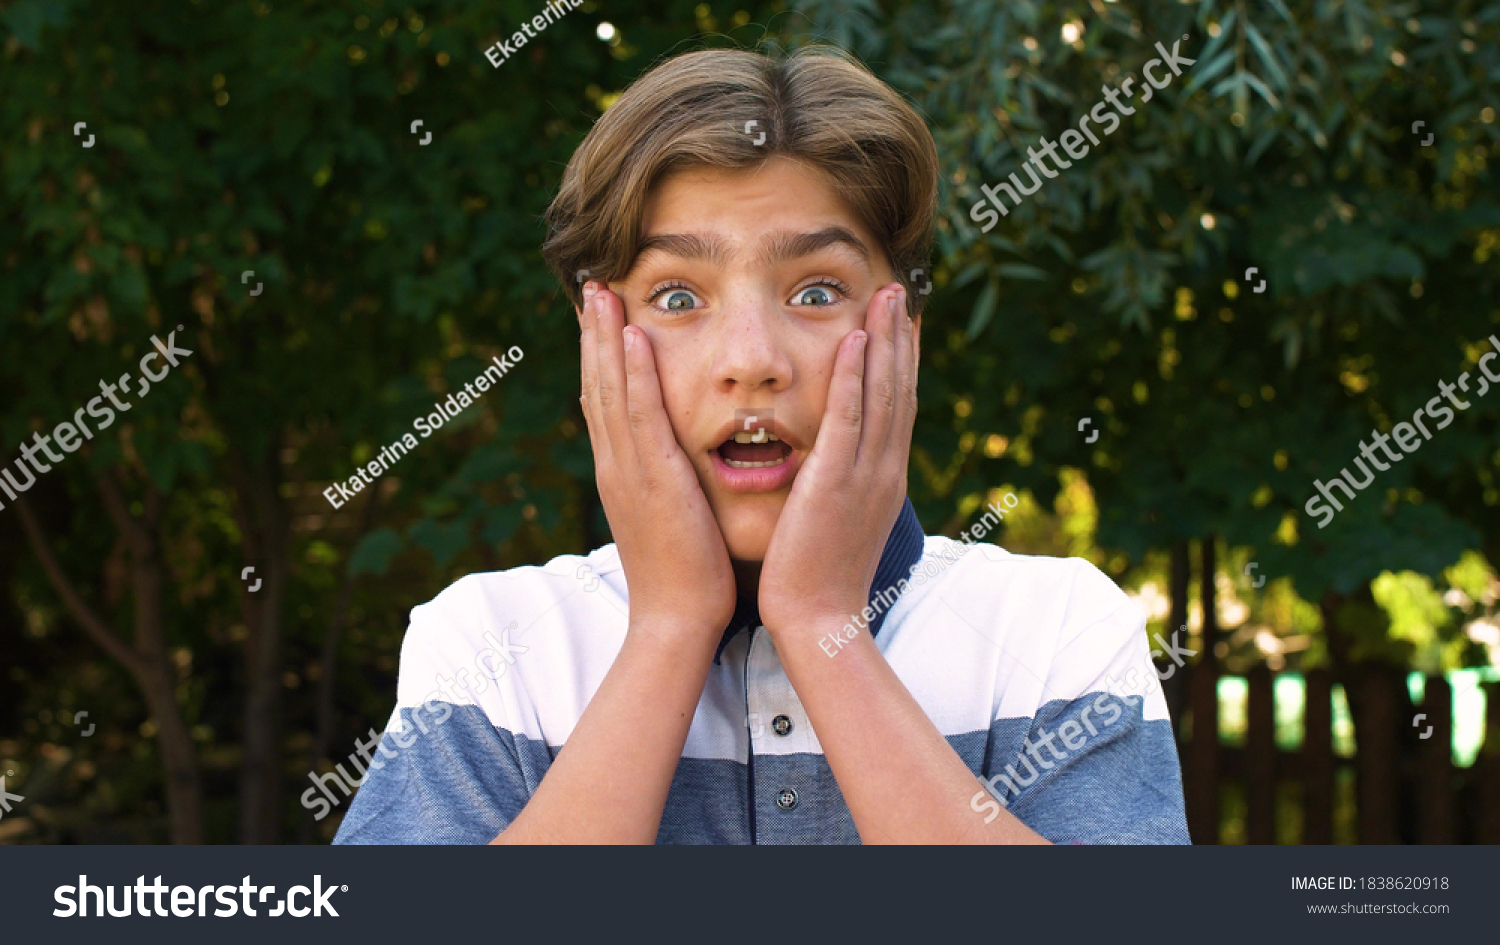 Close-up of the face of a young, cute, Caucasian boy who is surprised and puts the palms of his hands to his cheeks. Positive emotion. On the street. #1838620918